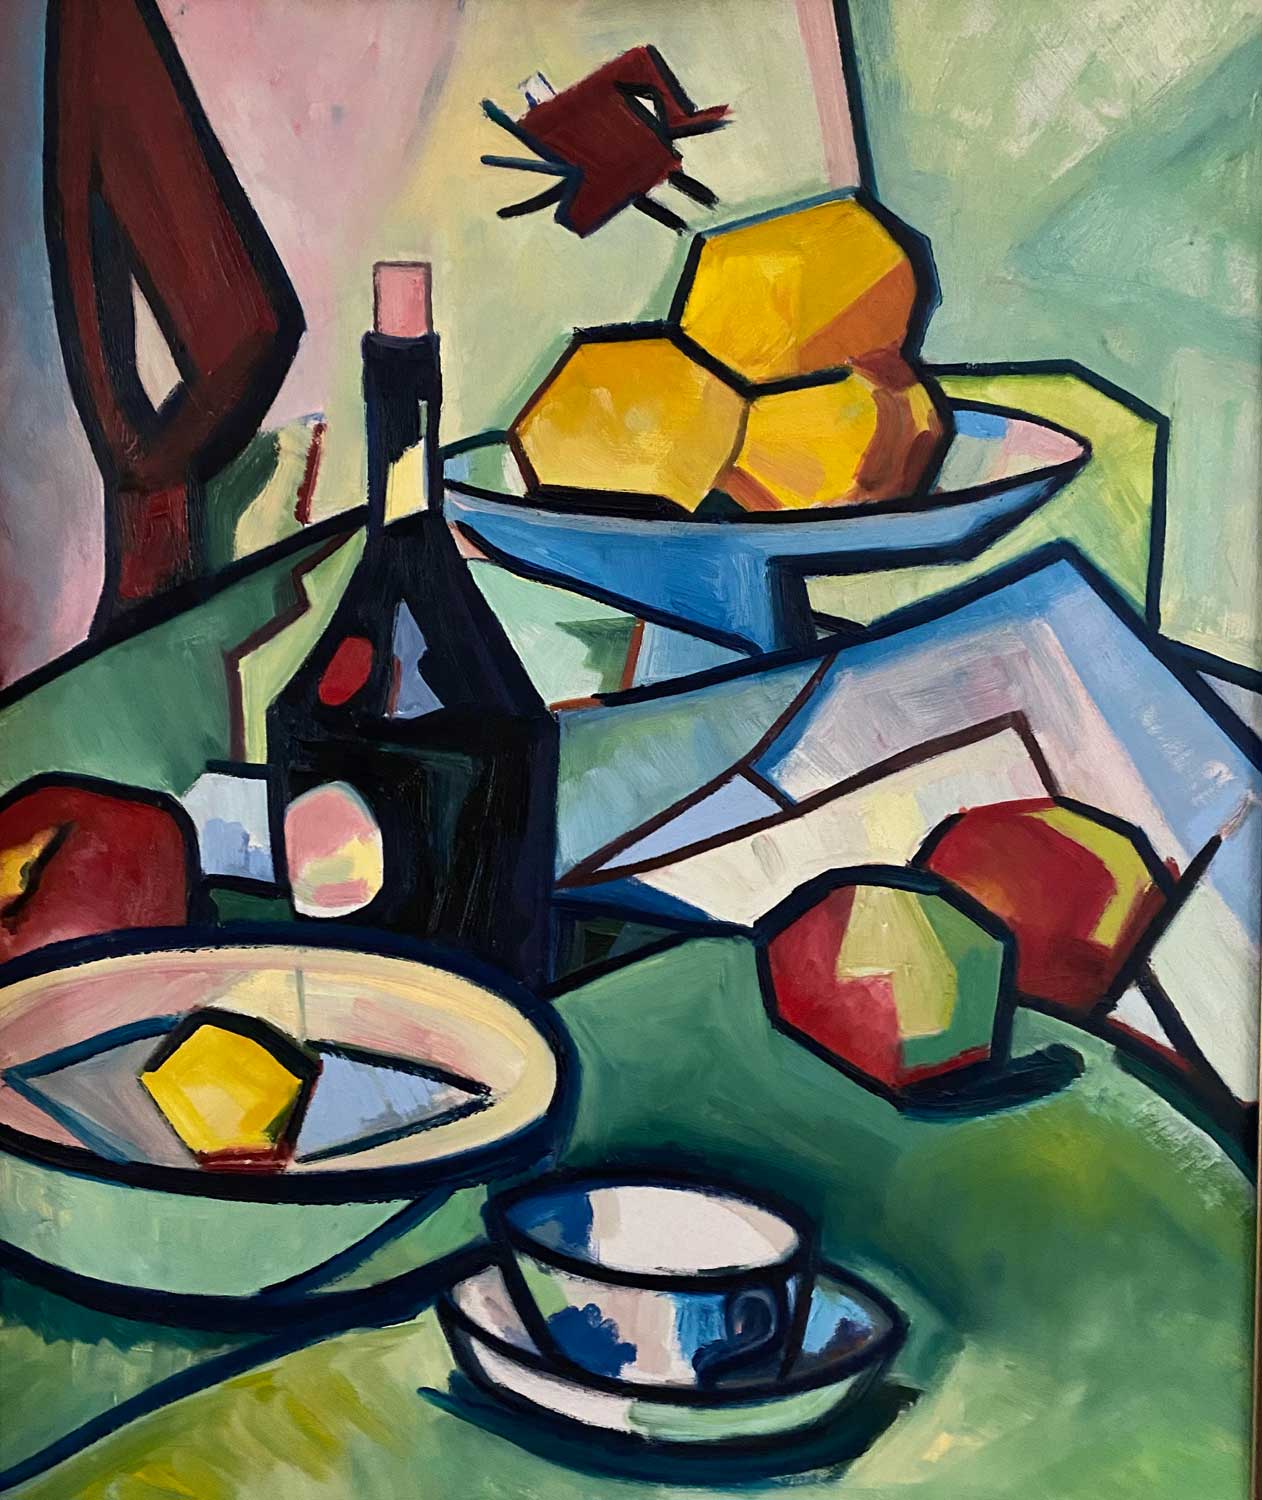 Apples and Oranges - after Peploe - Oil on board